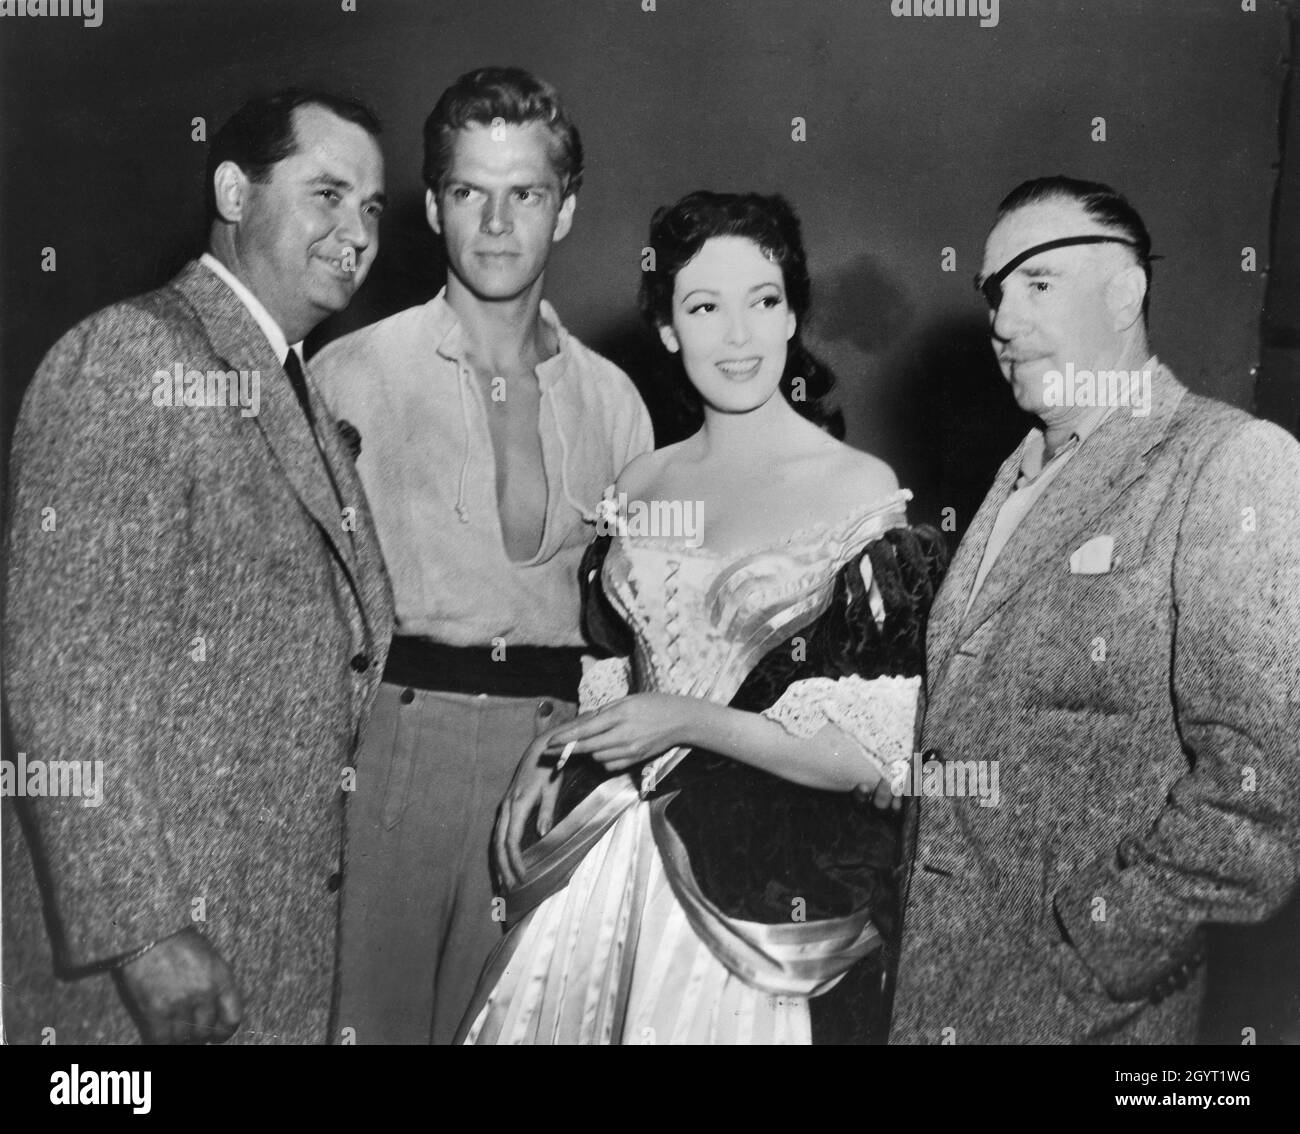 Producer EDMUND GRAINGER KEITH ANDES LINDA DARNELL and Director RAOUL WALSH on set candid during filming of BLACKBEARD THE PIRATE 1952 director RAOUL WALSH story DeVallon Scott screenplay Alan Le May costume design Michael Woulfe music Victor Young producer Edmund Grainger RKO Radio Pictures Stock Photo